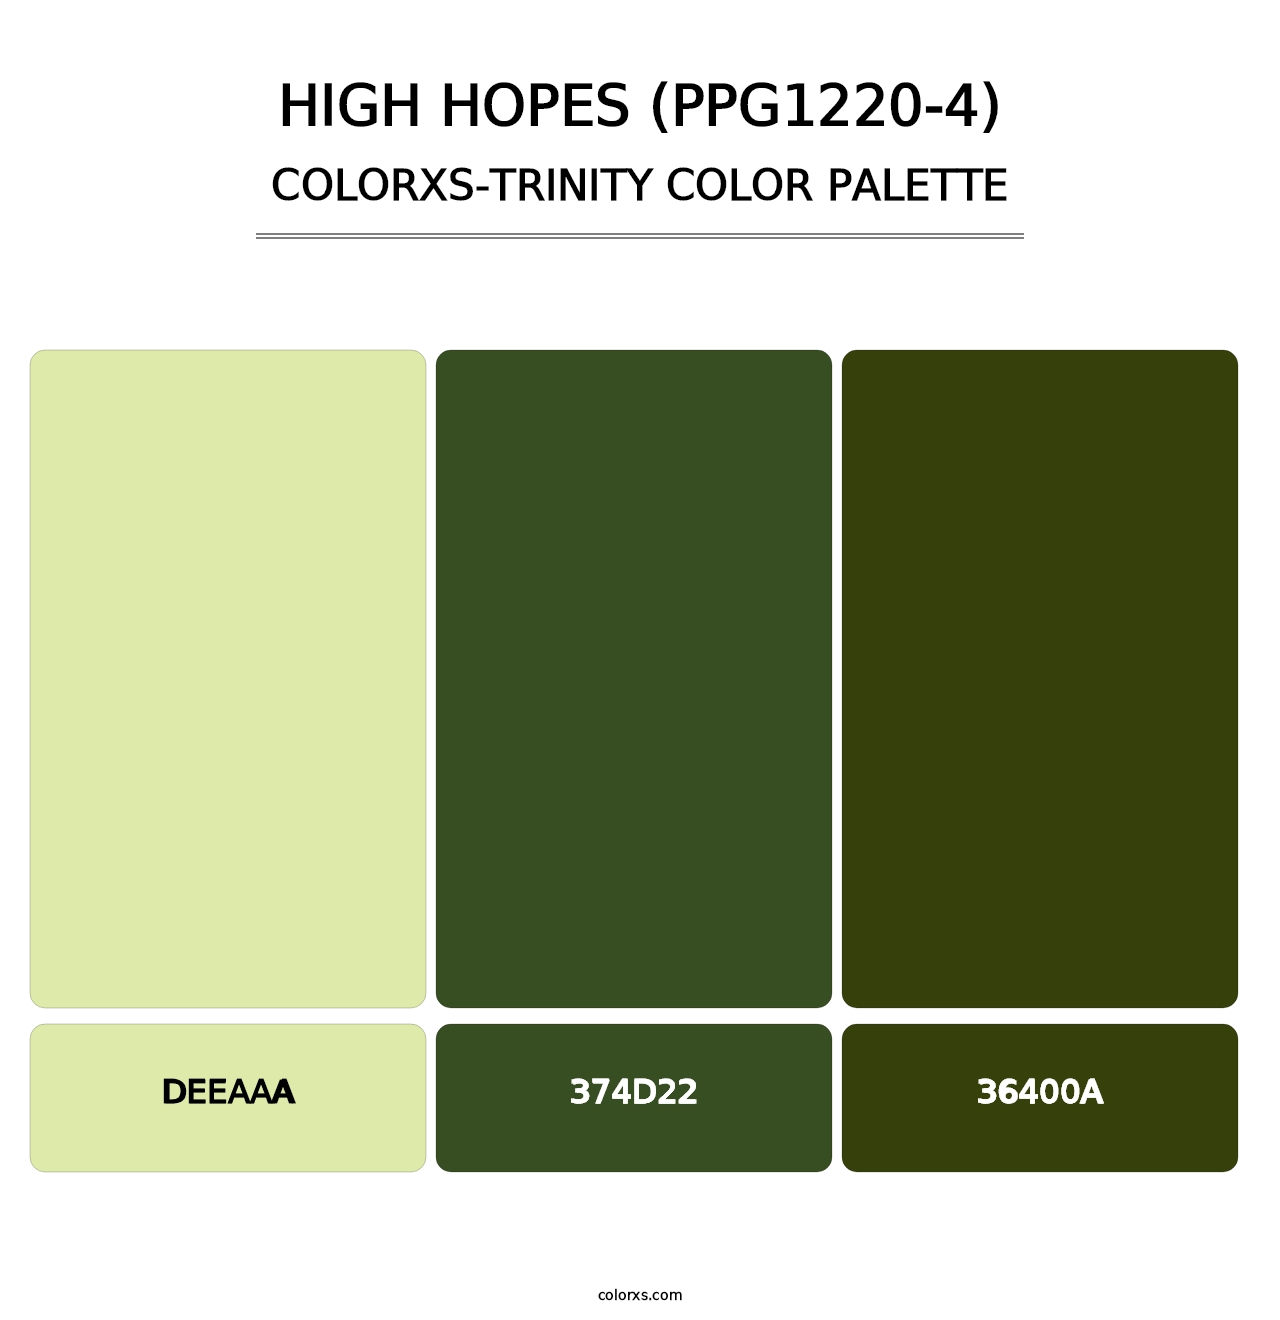 High Hopes (PPG1220-4) - Colorxs Trinity Palette